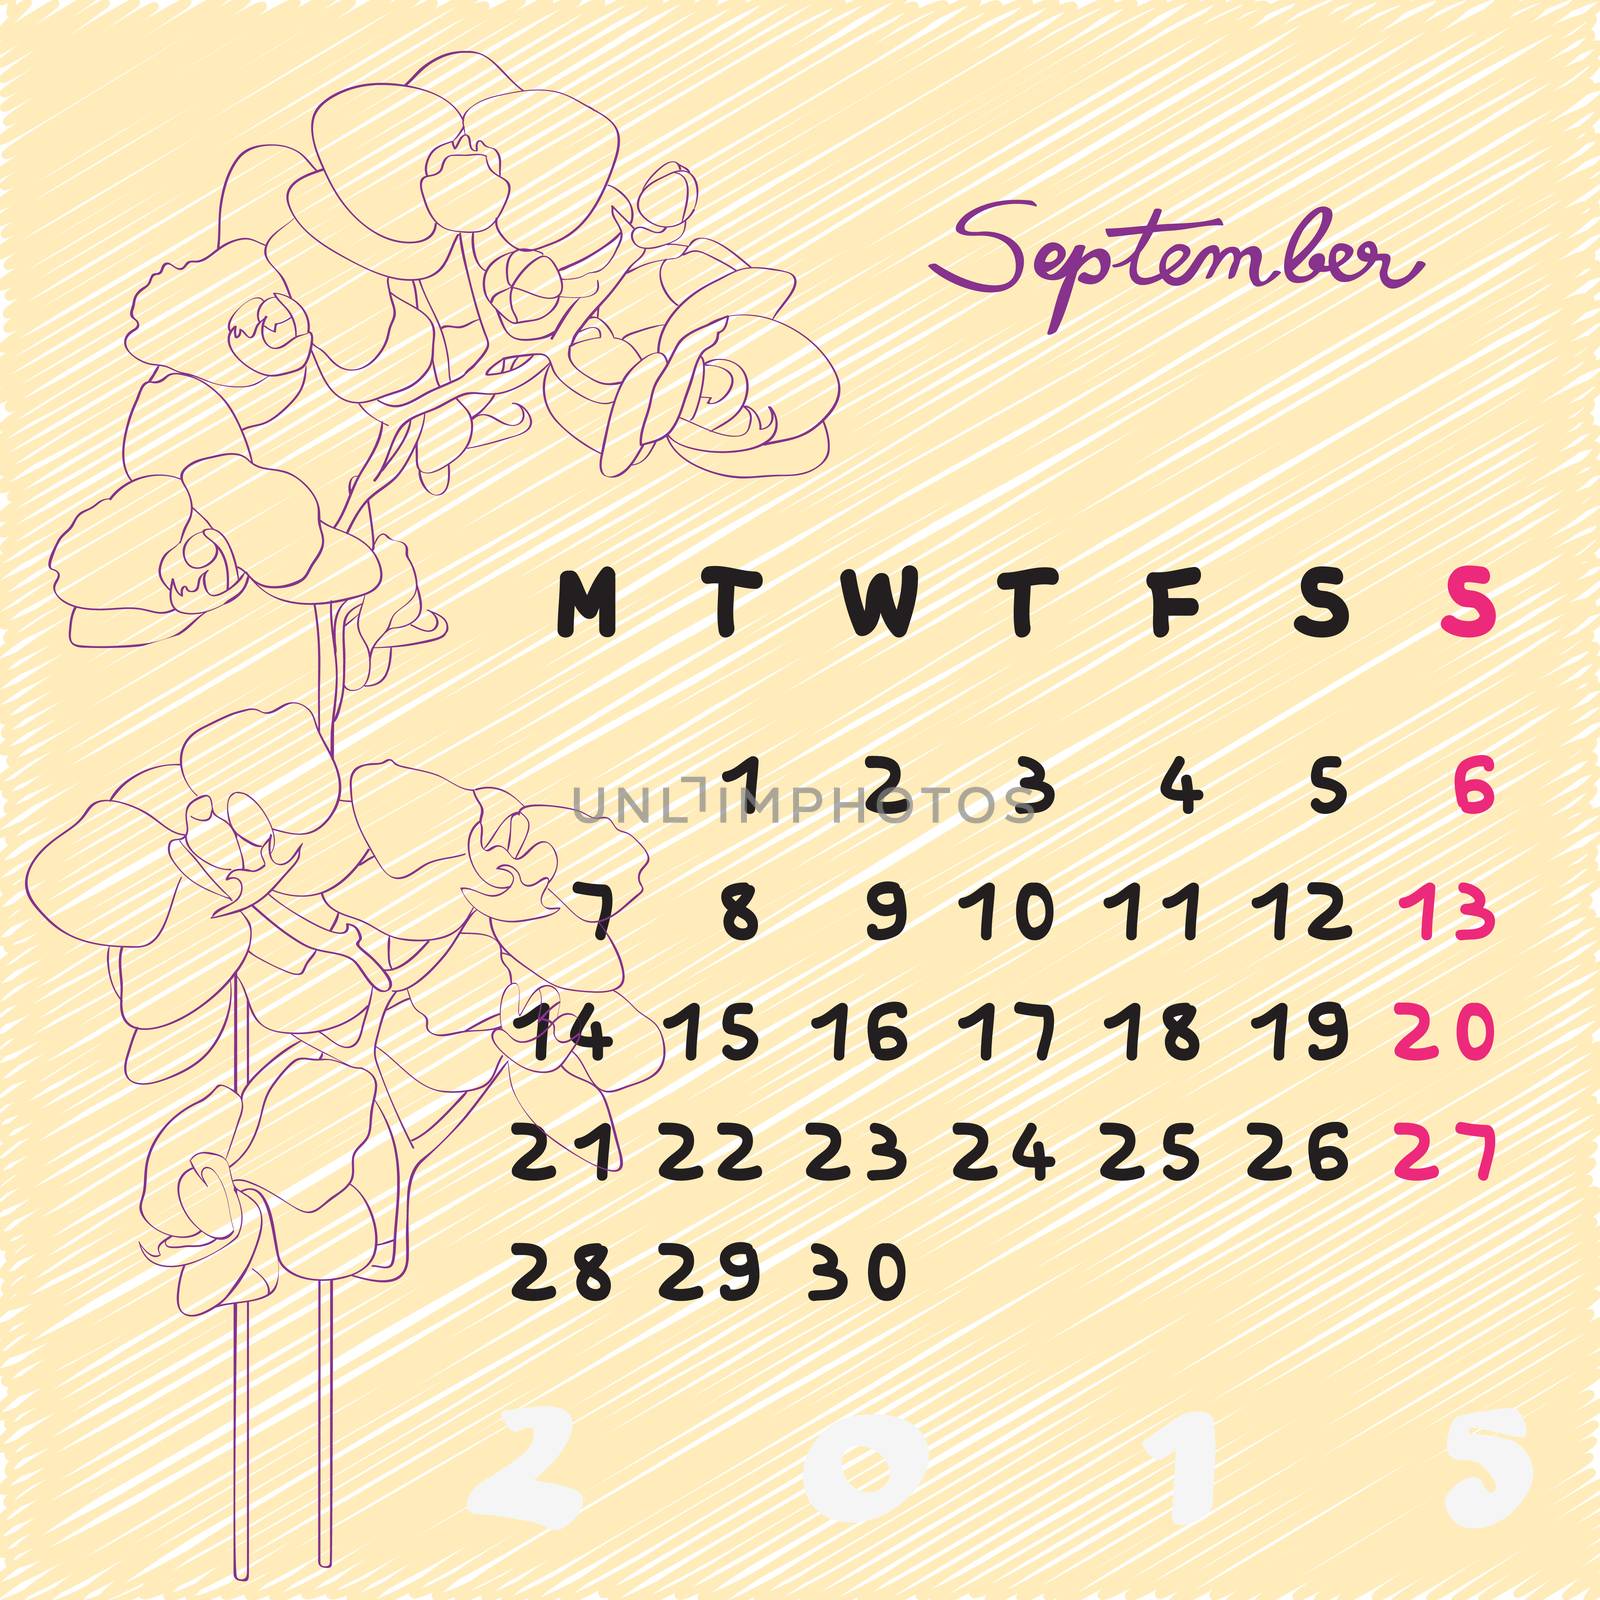 Calendar 2015, graphic illustration of September month calendar with original hand drawn text and orchids flower